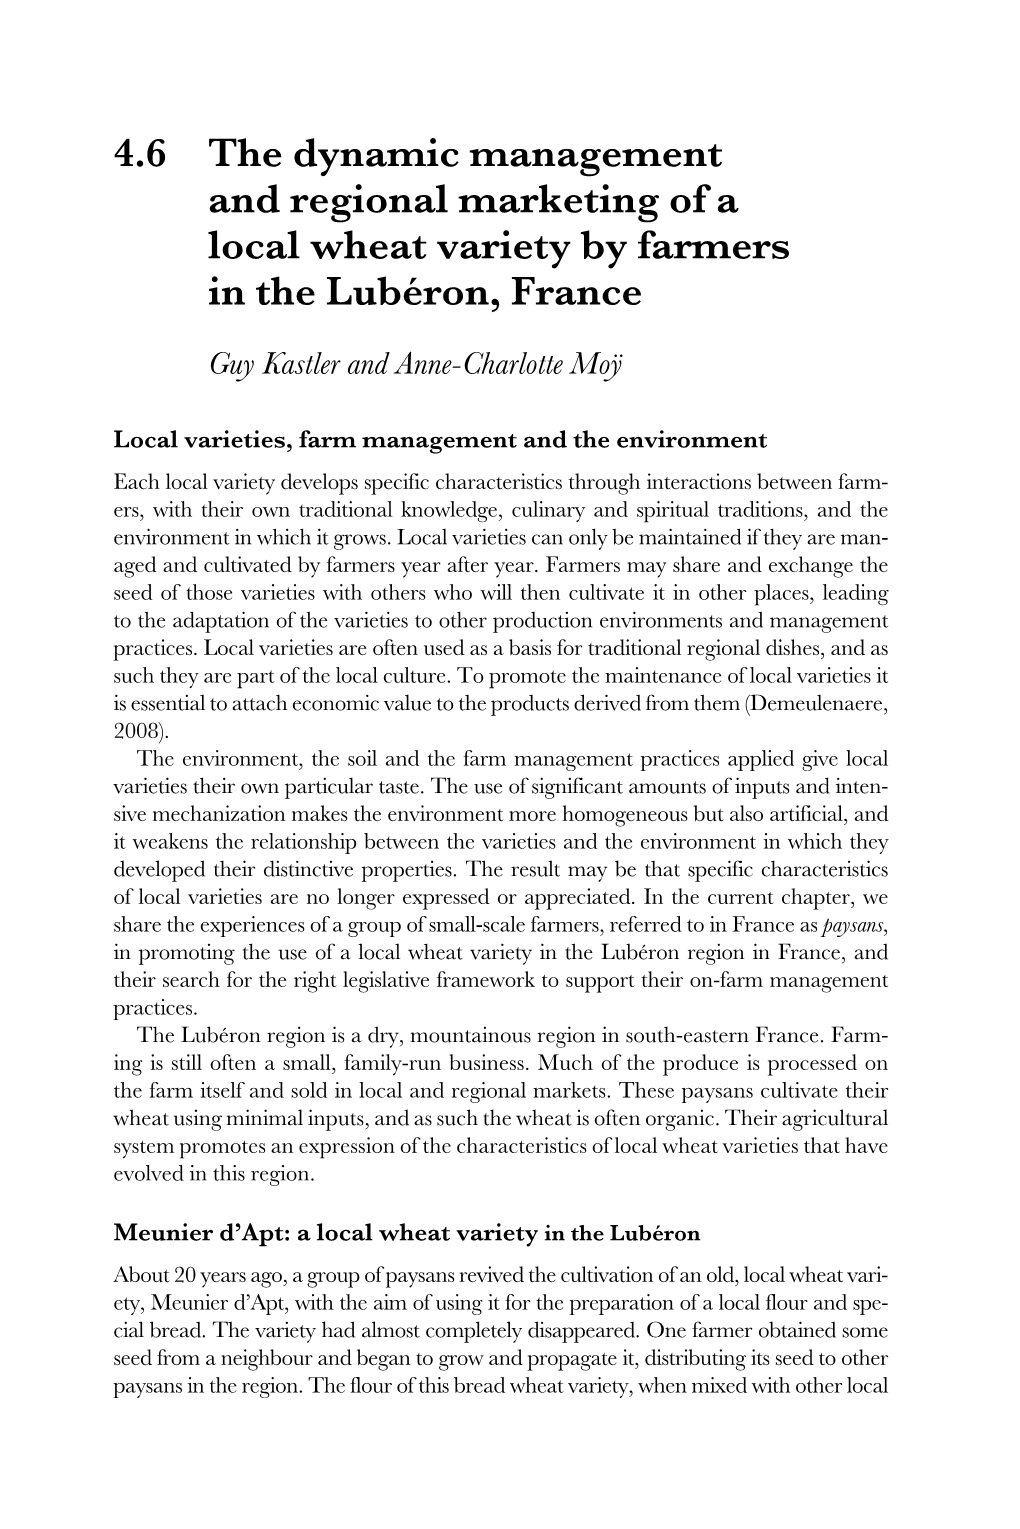 4.6 the Dynamic Management and Regional Marketing of a Local Wheat Variety by Farmers in the Lubéron, France